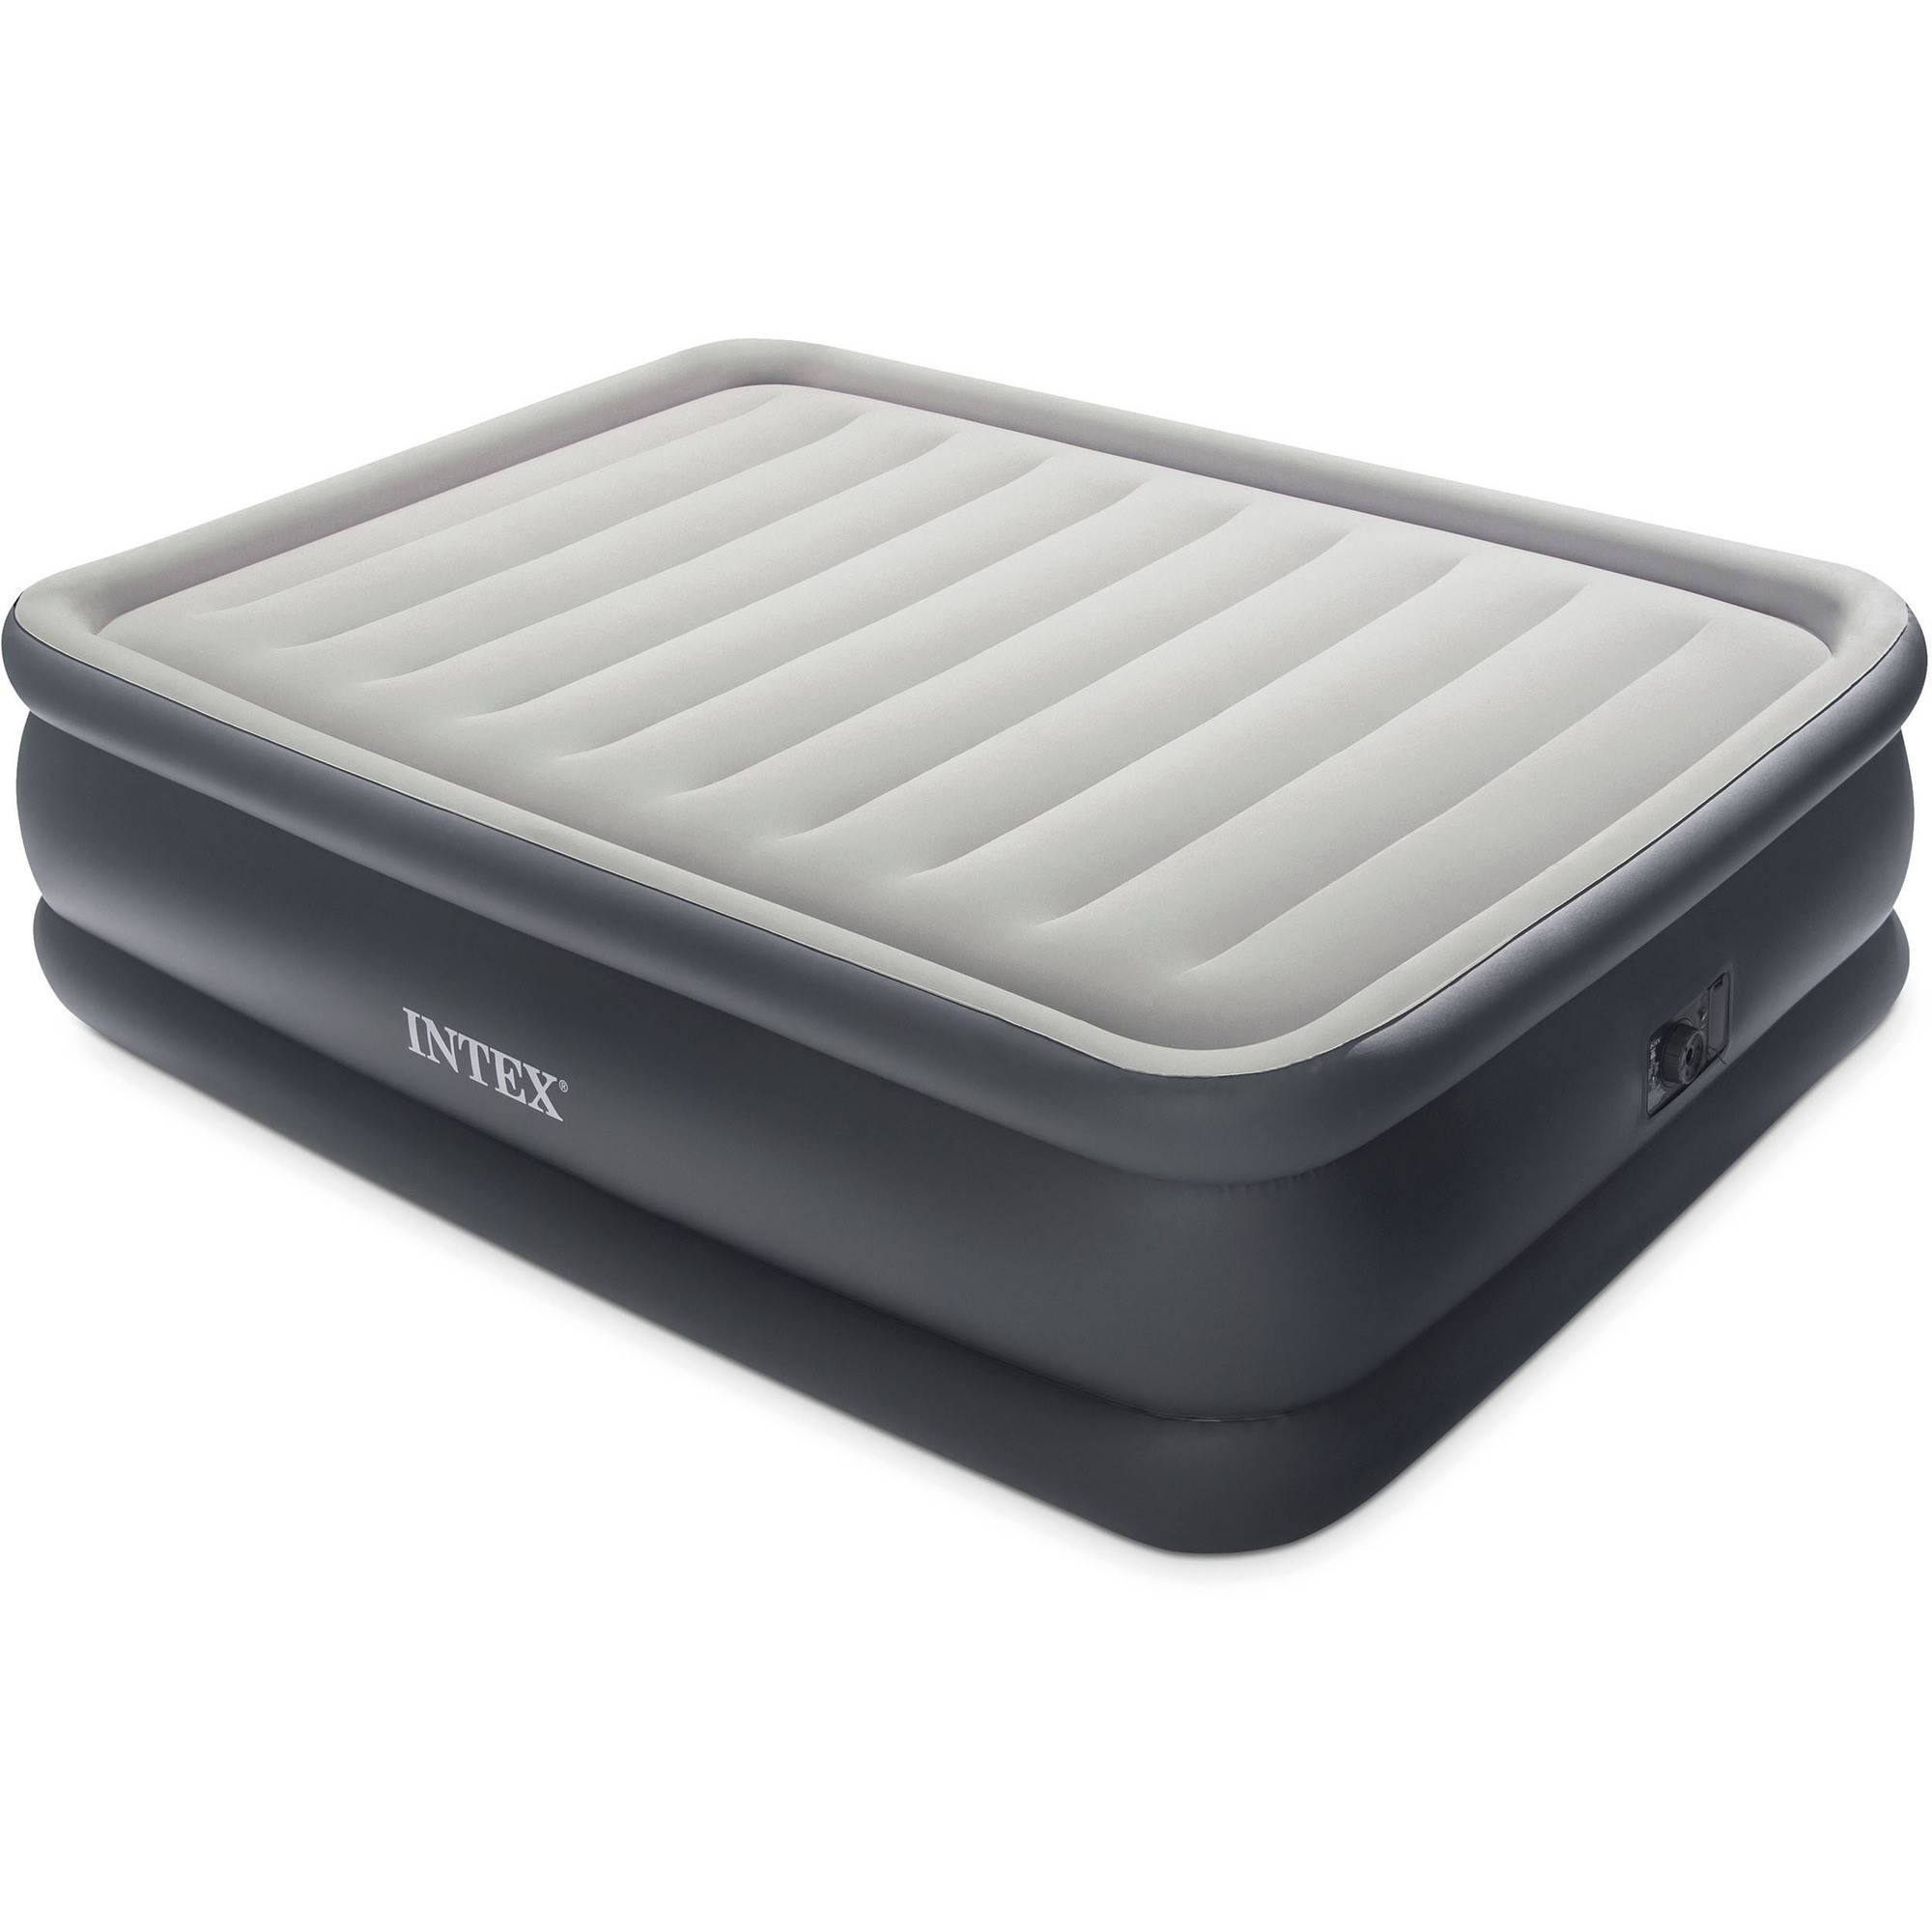 Intex 22" Queen Raised Downy Fiber-Tech Airbed with Built-In Pump - image 1 of 4